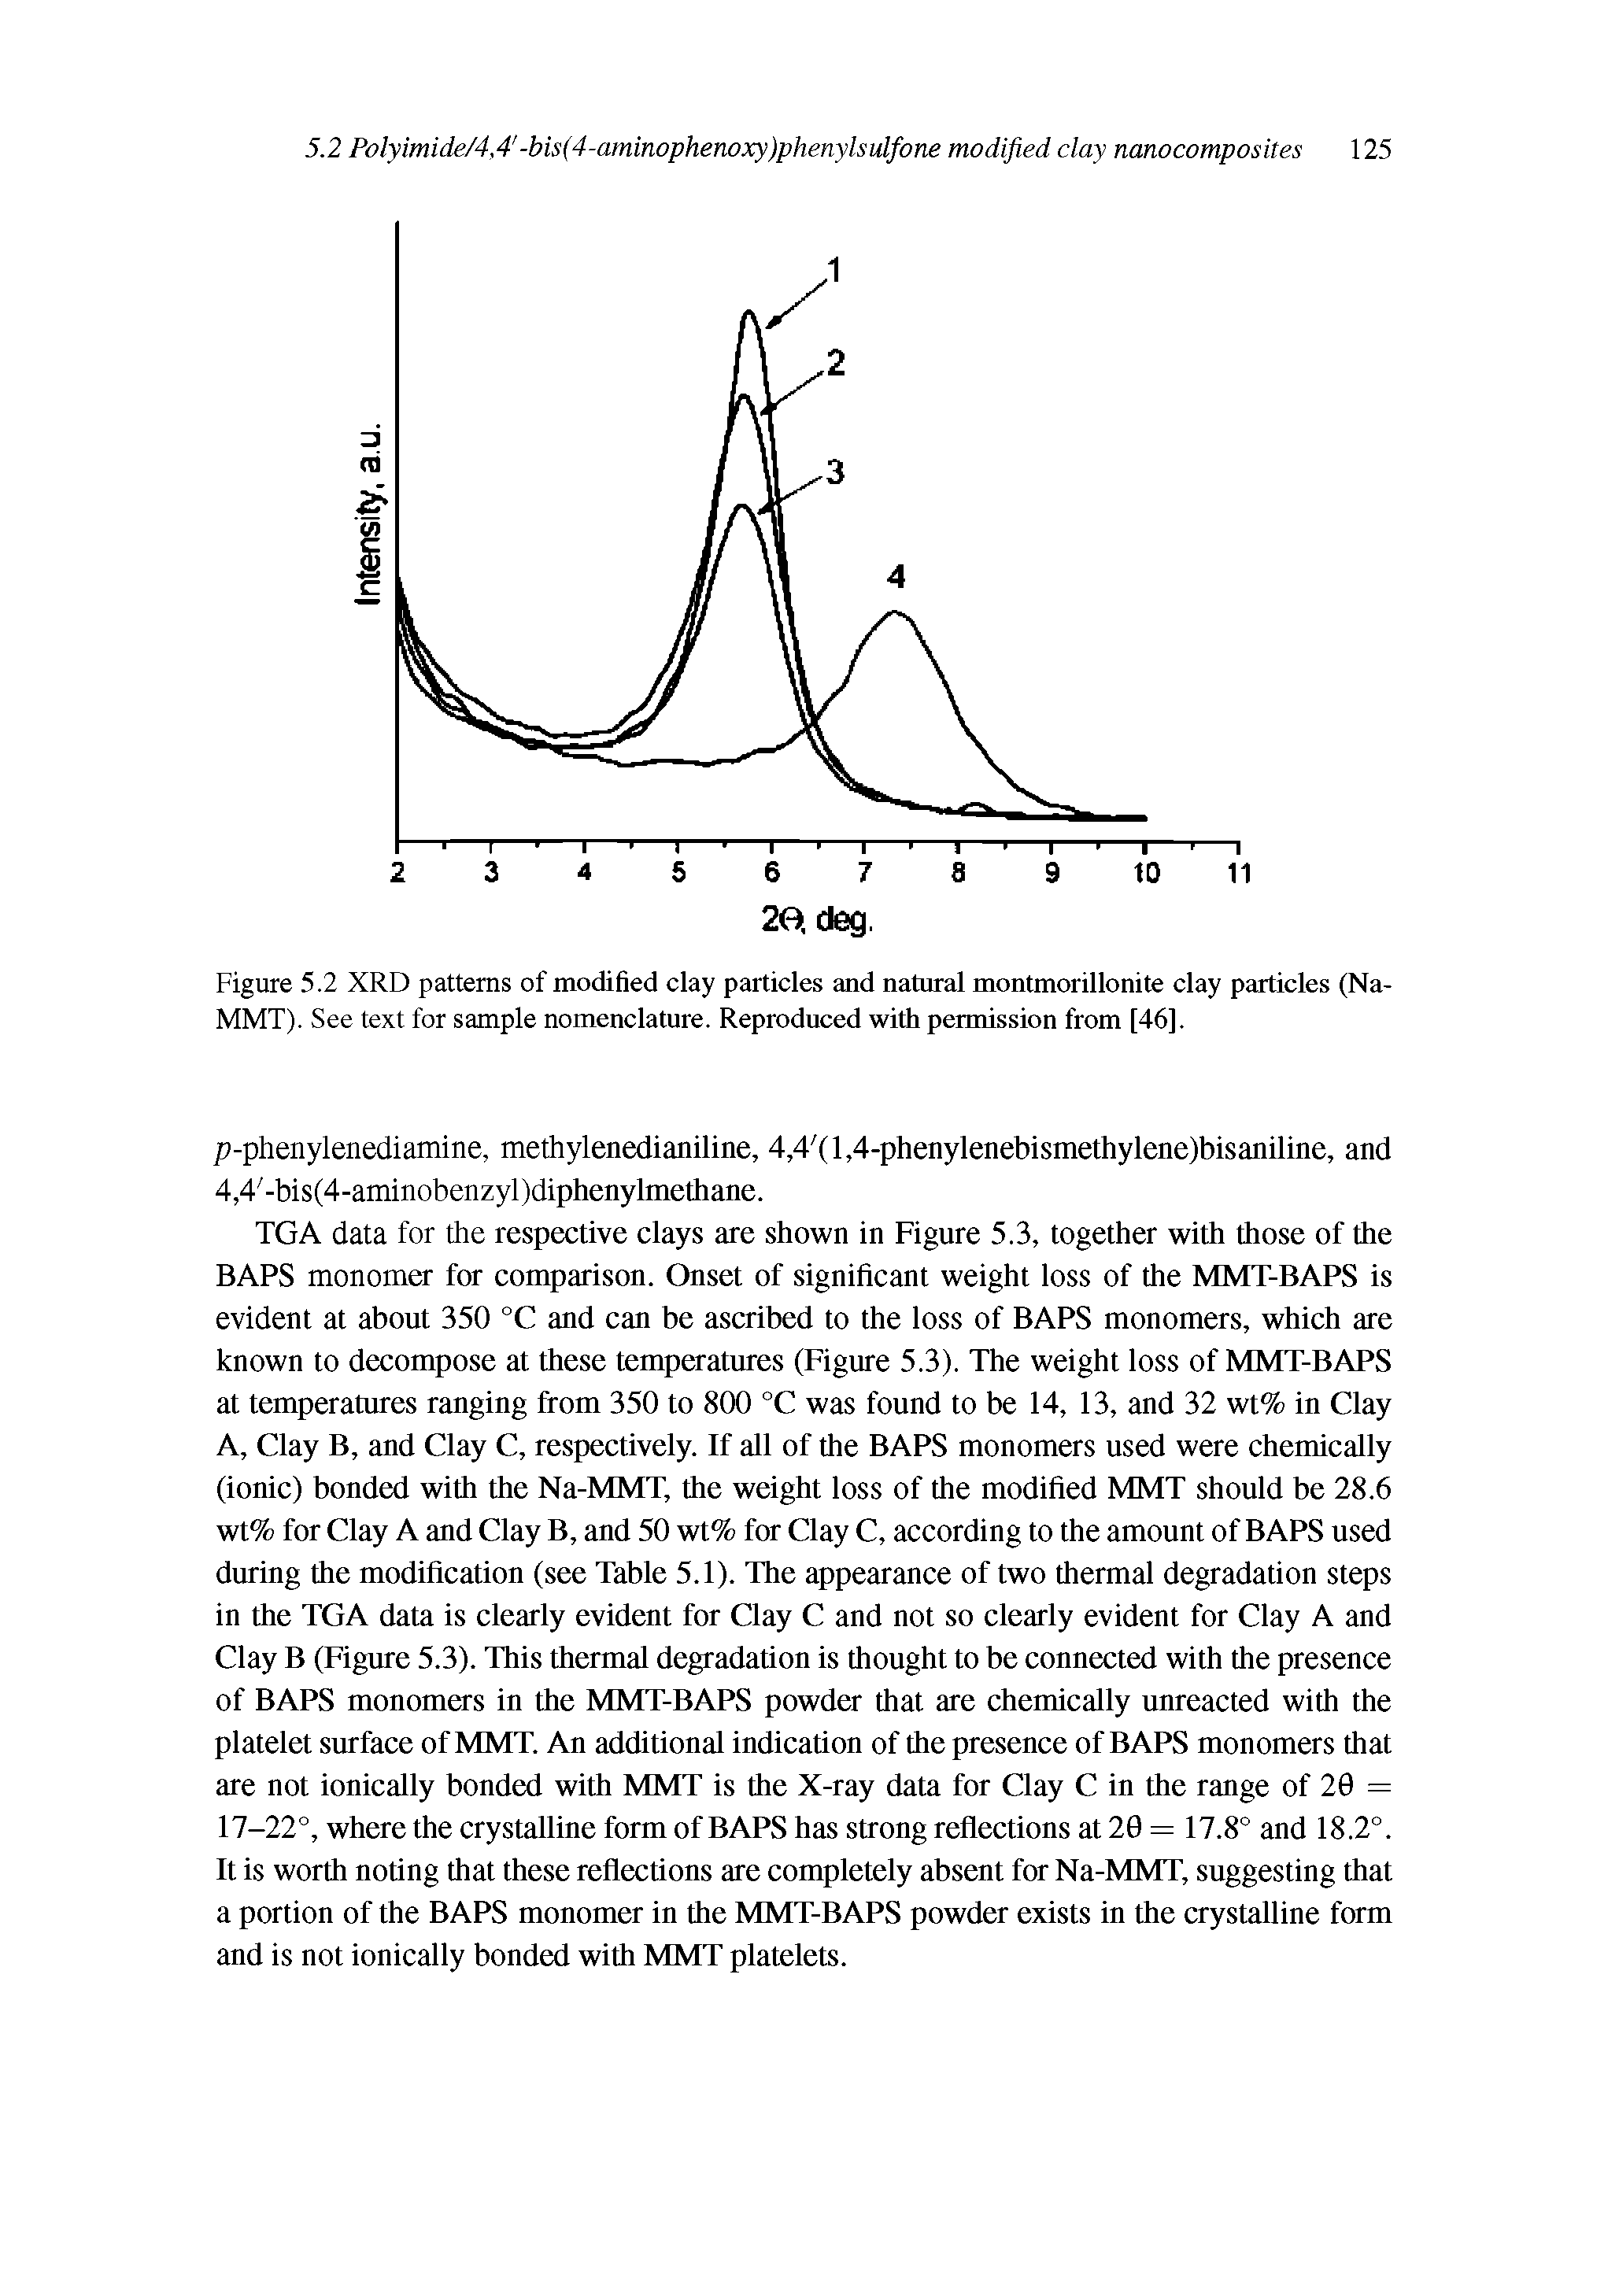 Figure 5.2 XRD patterns of modified clay particles and natural montmorillonite clay particles (Na-MMT). See text for sample nomenclature. Reproduced with permission from [46].